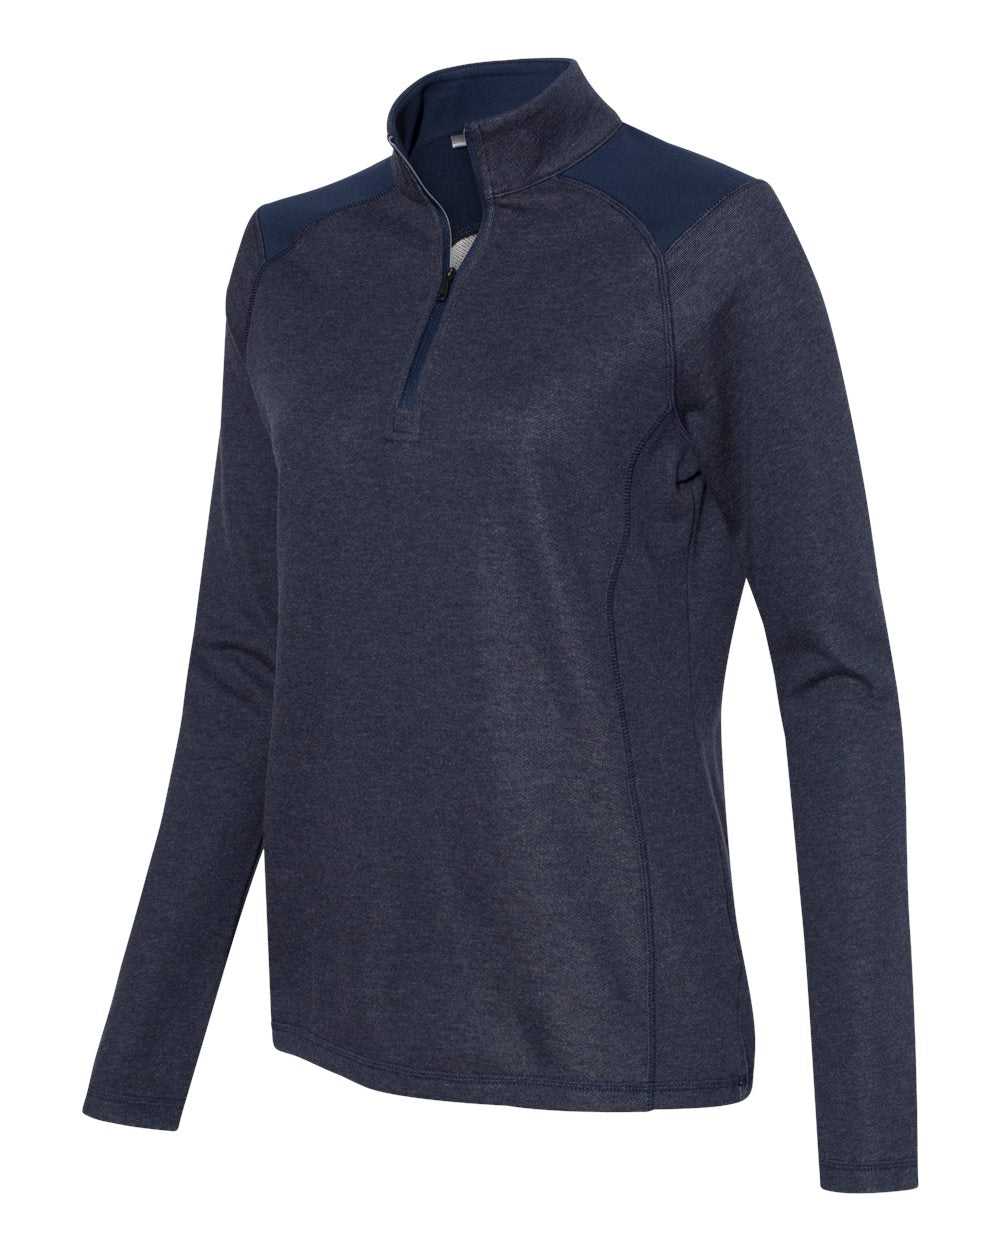 Adidas A464 Women's Heathered Quarter Zip Pullover with Colorblocked Shoulders - Collegiate Navy Heather - HIT a Double